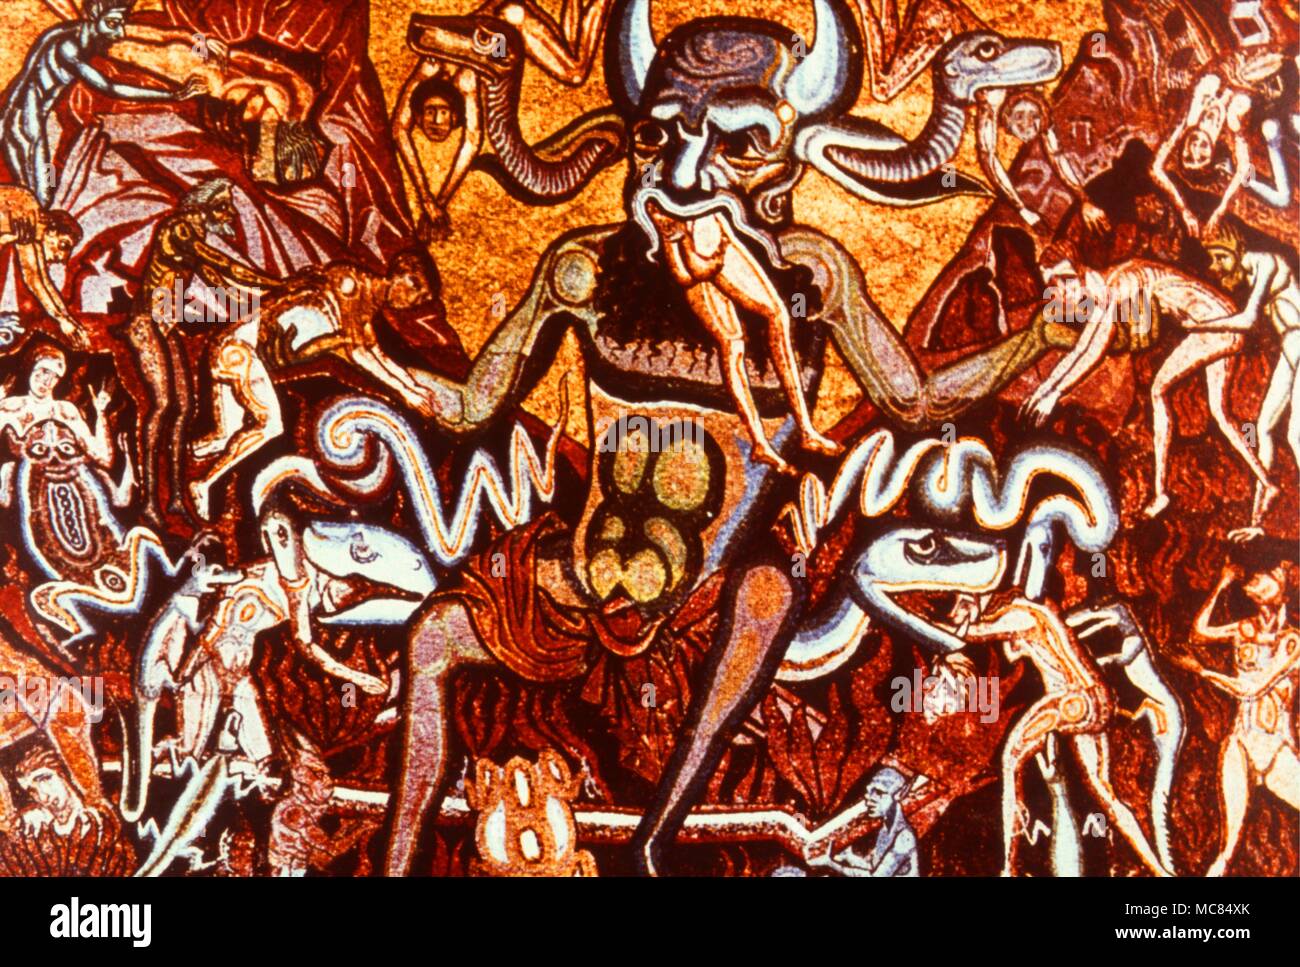 Mosaic work of the twelfth century depicting Lucifer perpetually devouring Judas. In th ceiling of the Baptistery of St. John in Florence, Italy. Stock Photo